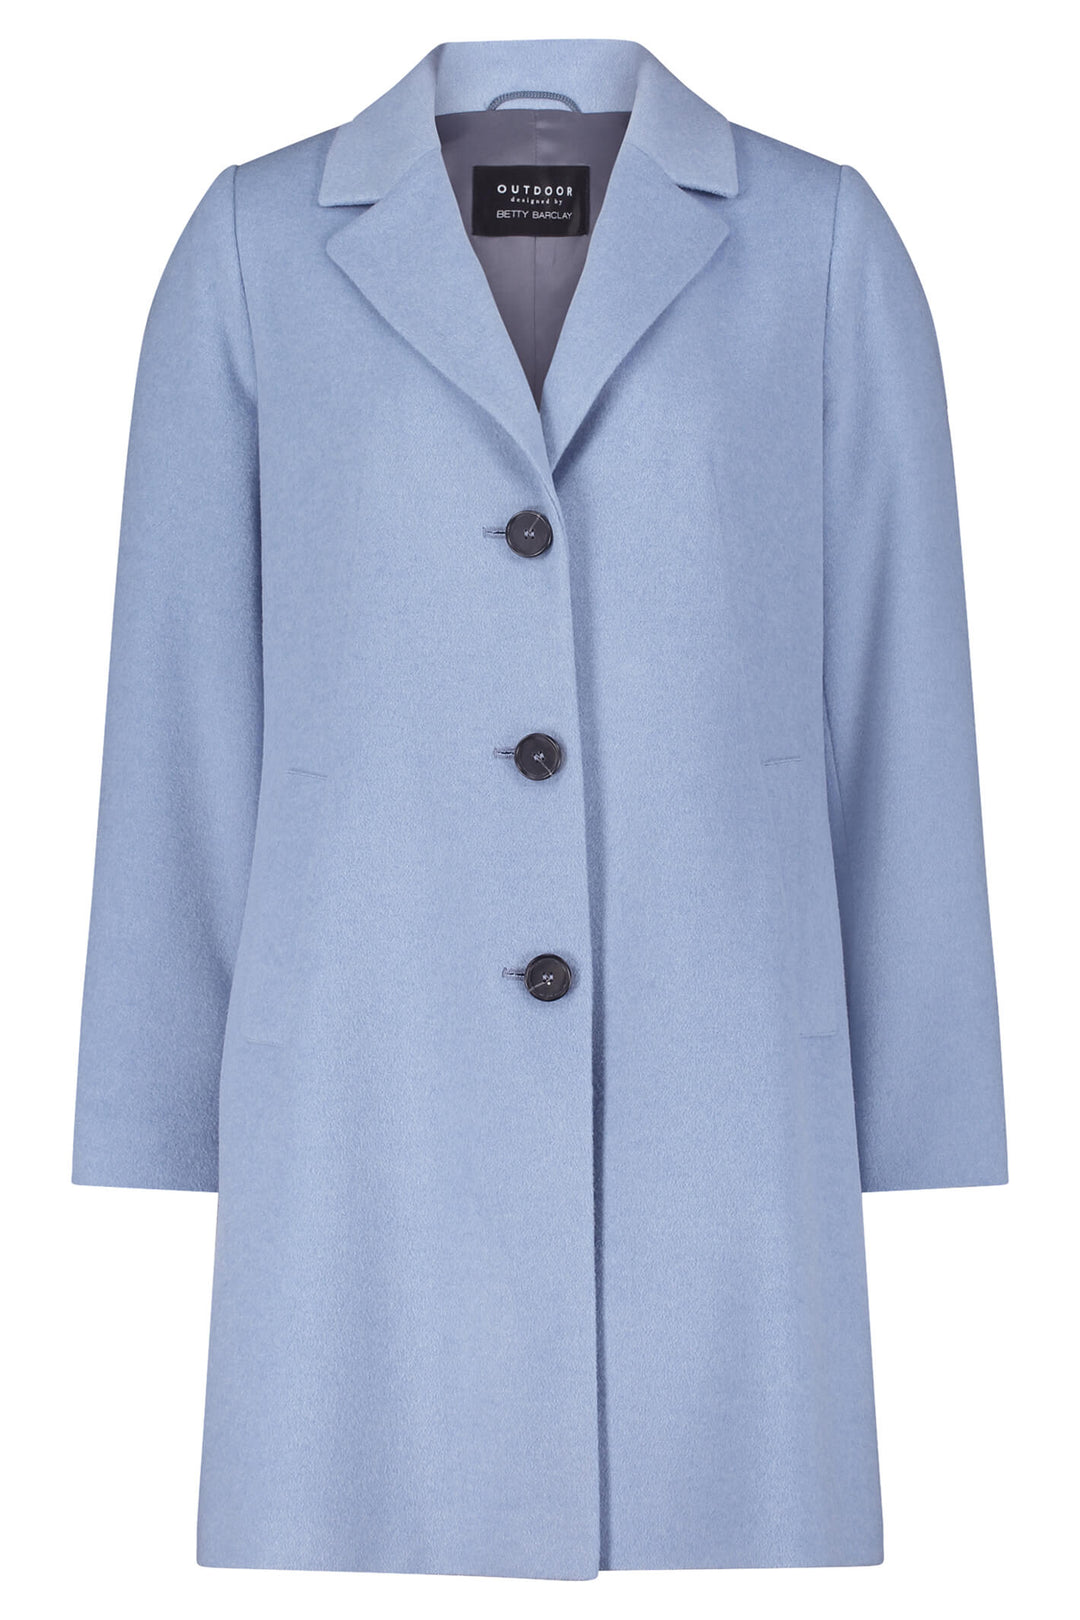 Betty Barclay 7578 2146 8002 Lavender Blue Wool Mix Three Button Coat - Dotique Chesterfield